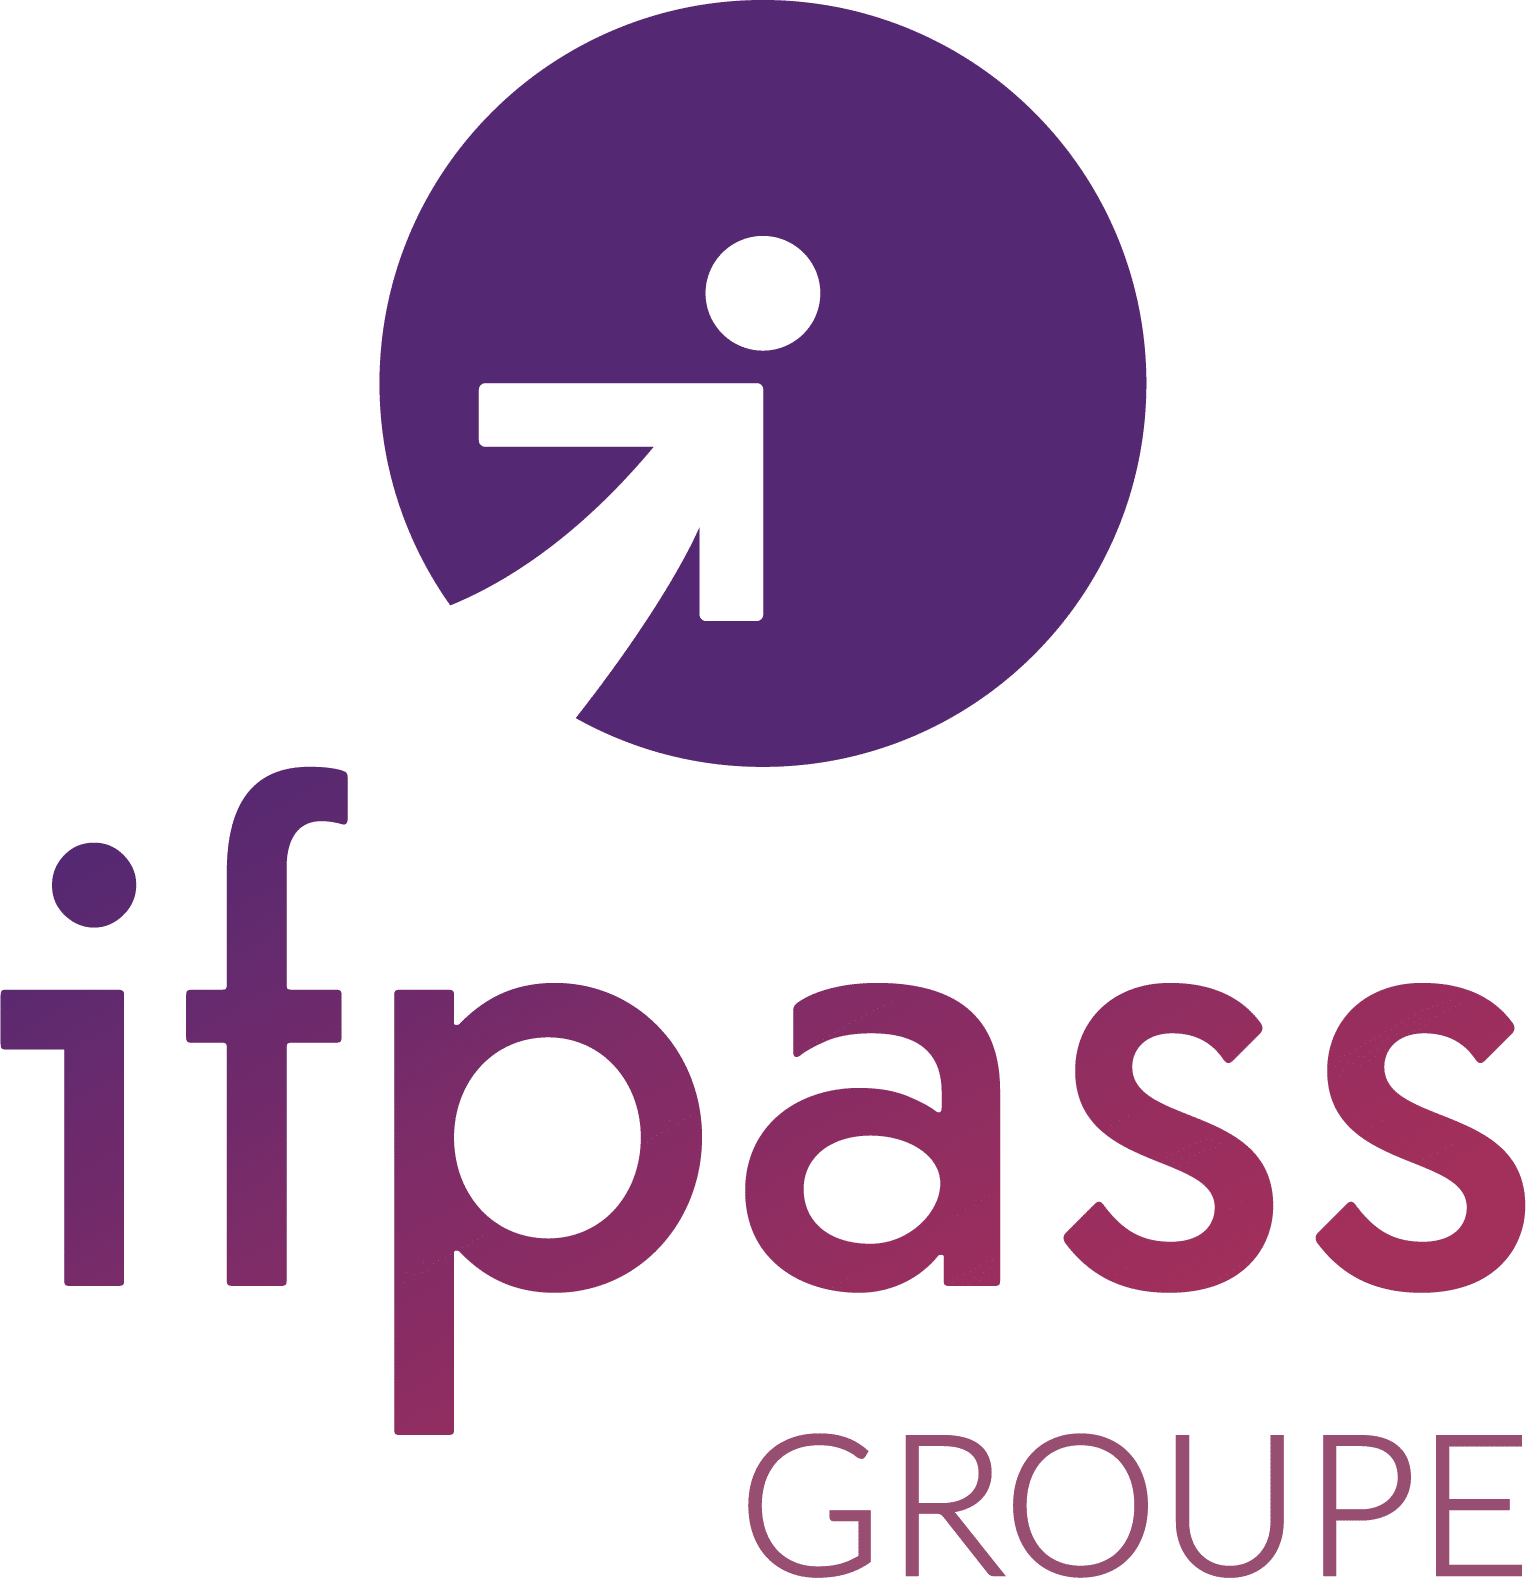 ifpass groupe vertical coul